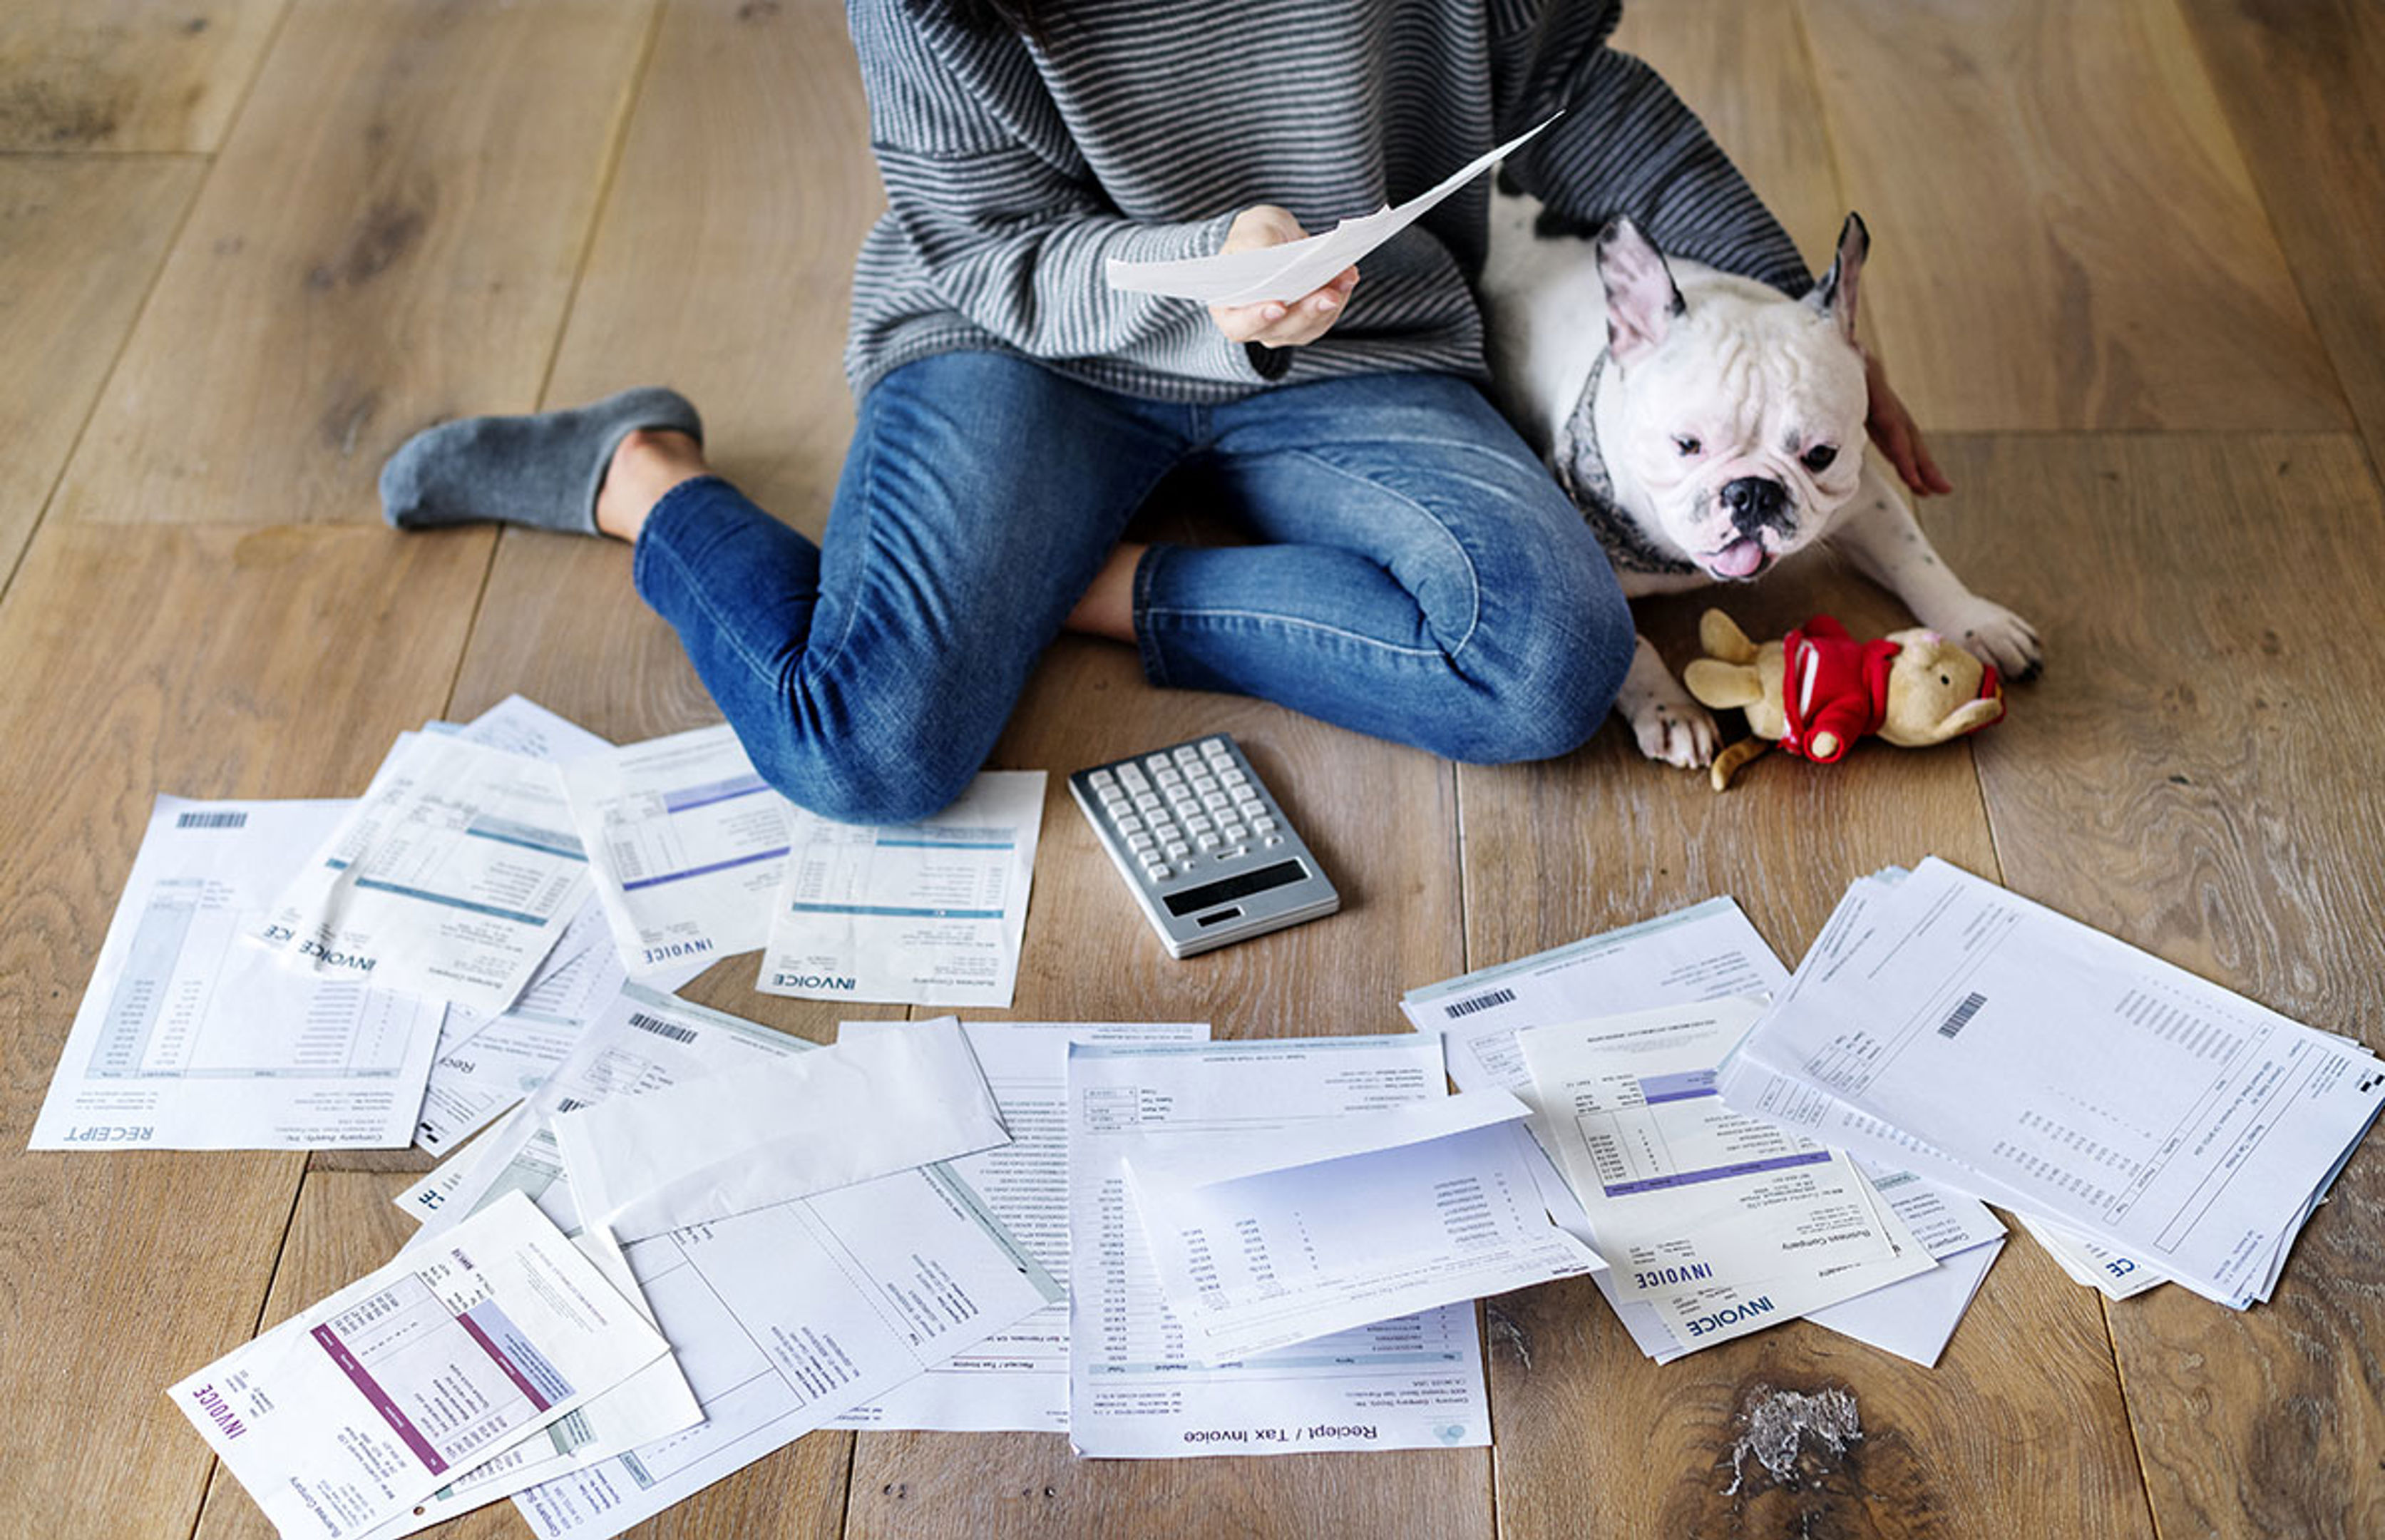 Lady On Floor With Dog And Paperwork